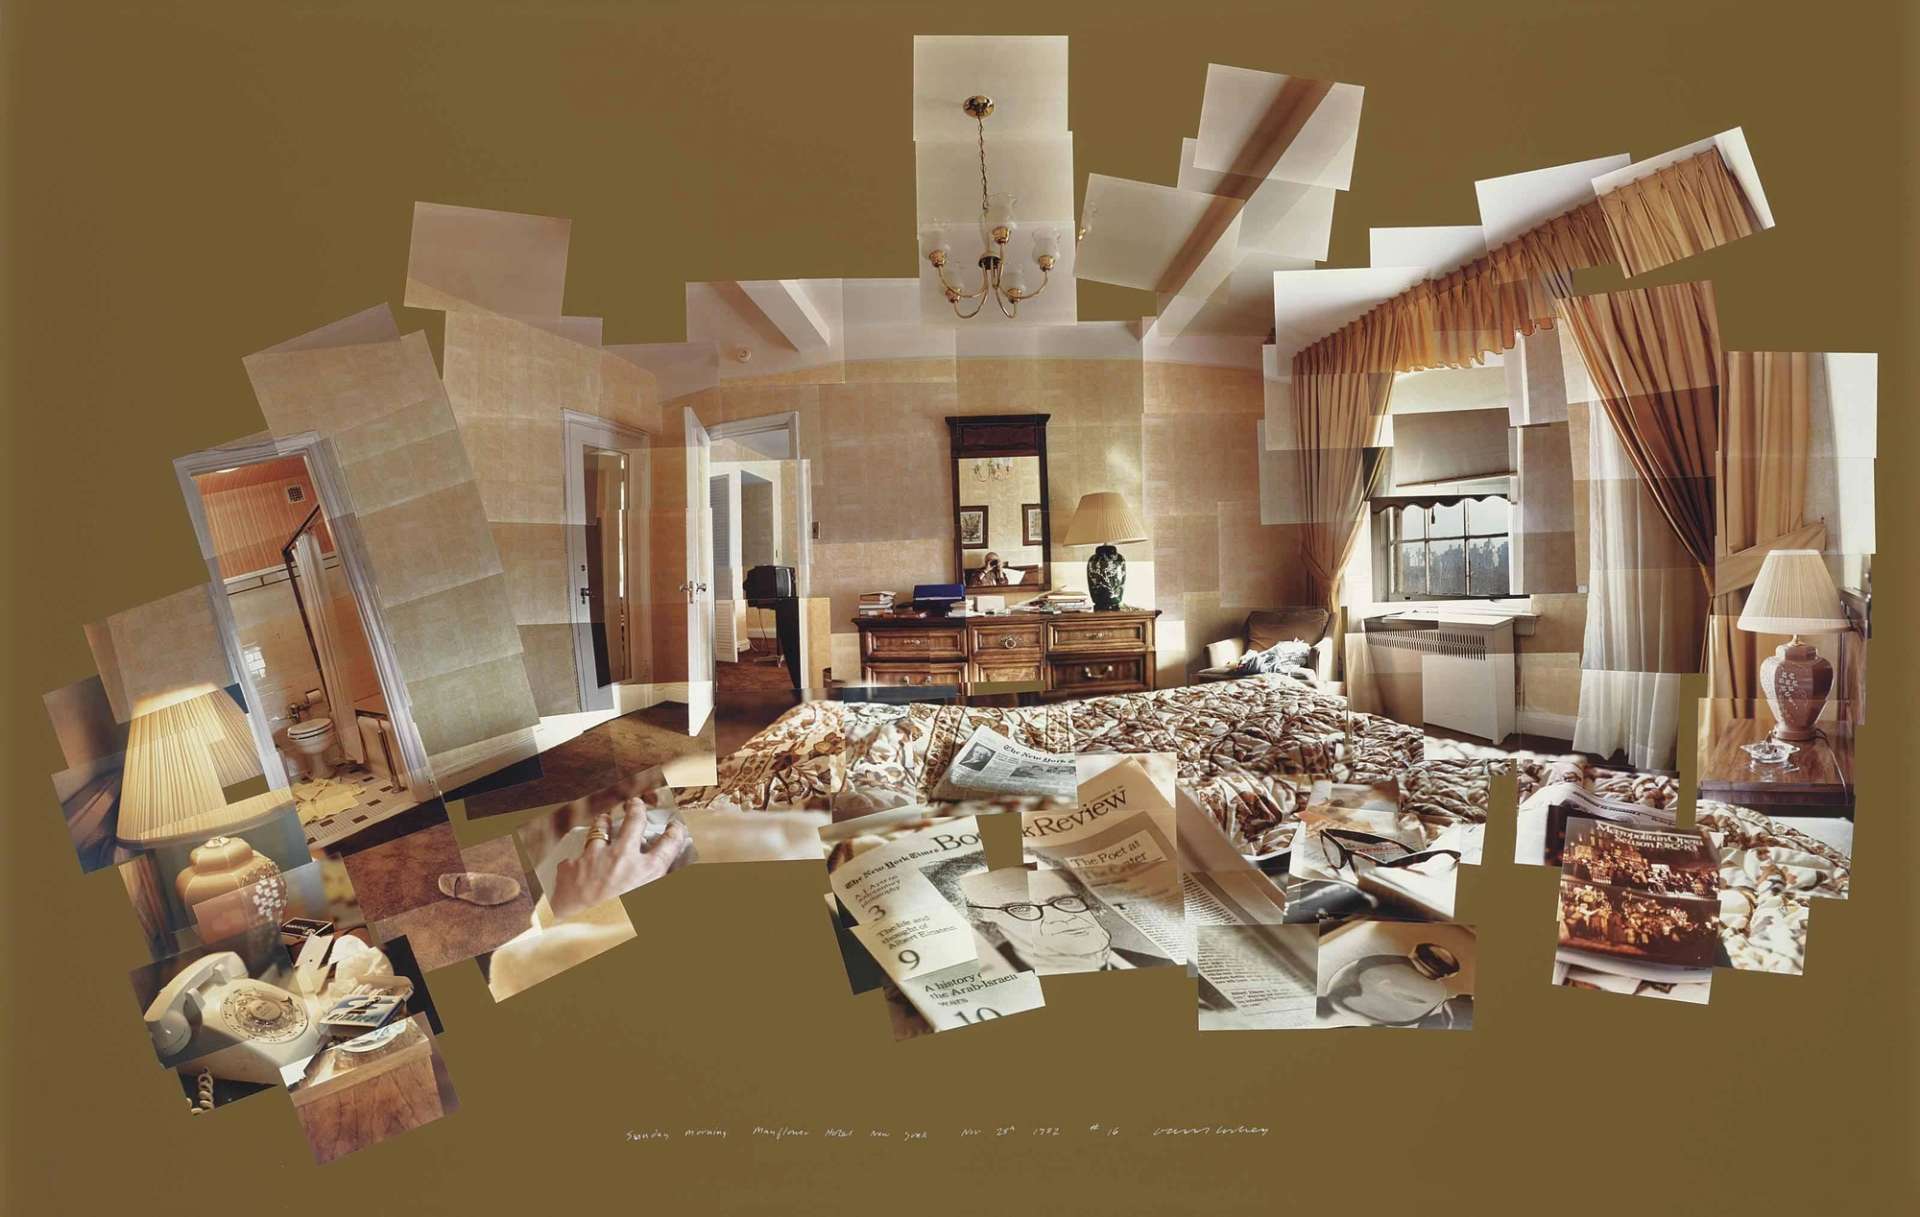 David Hockney's Sunday Morning Nov 28th 1982 Mayflower Hotel N.Y. A photo collage of the interior of a hotel room.